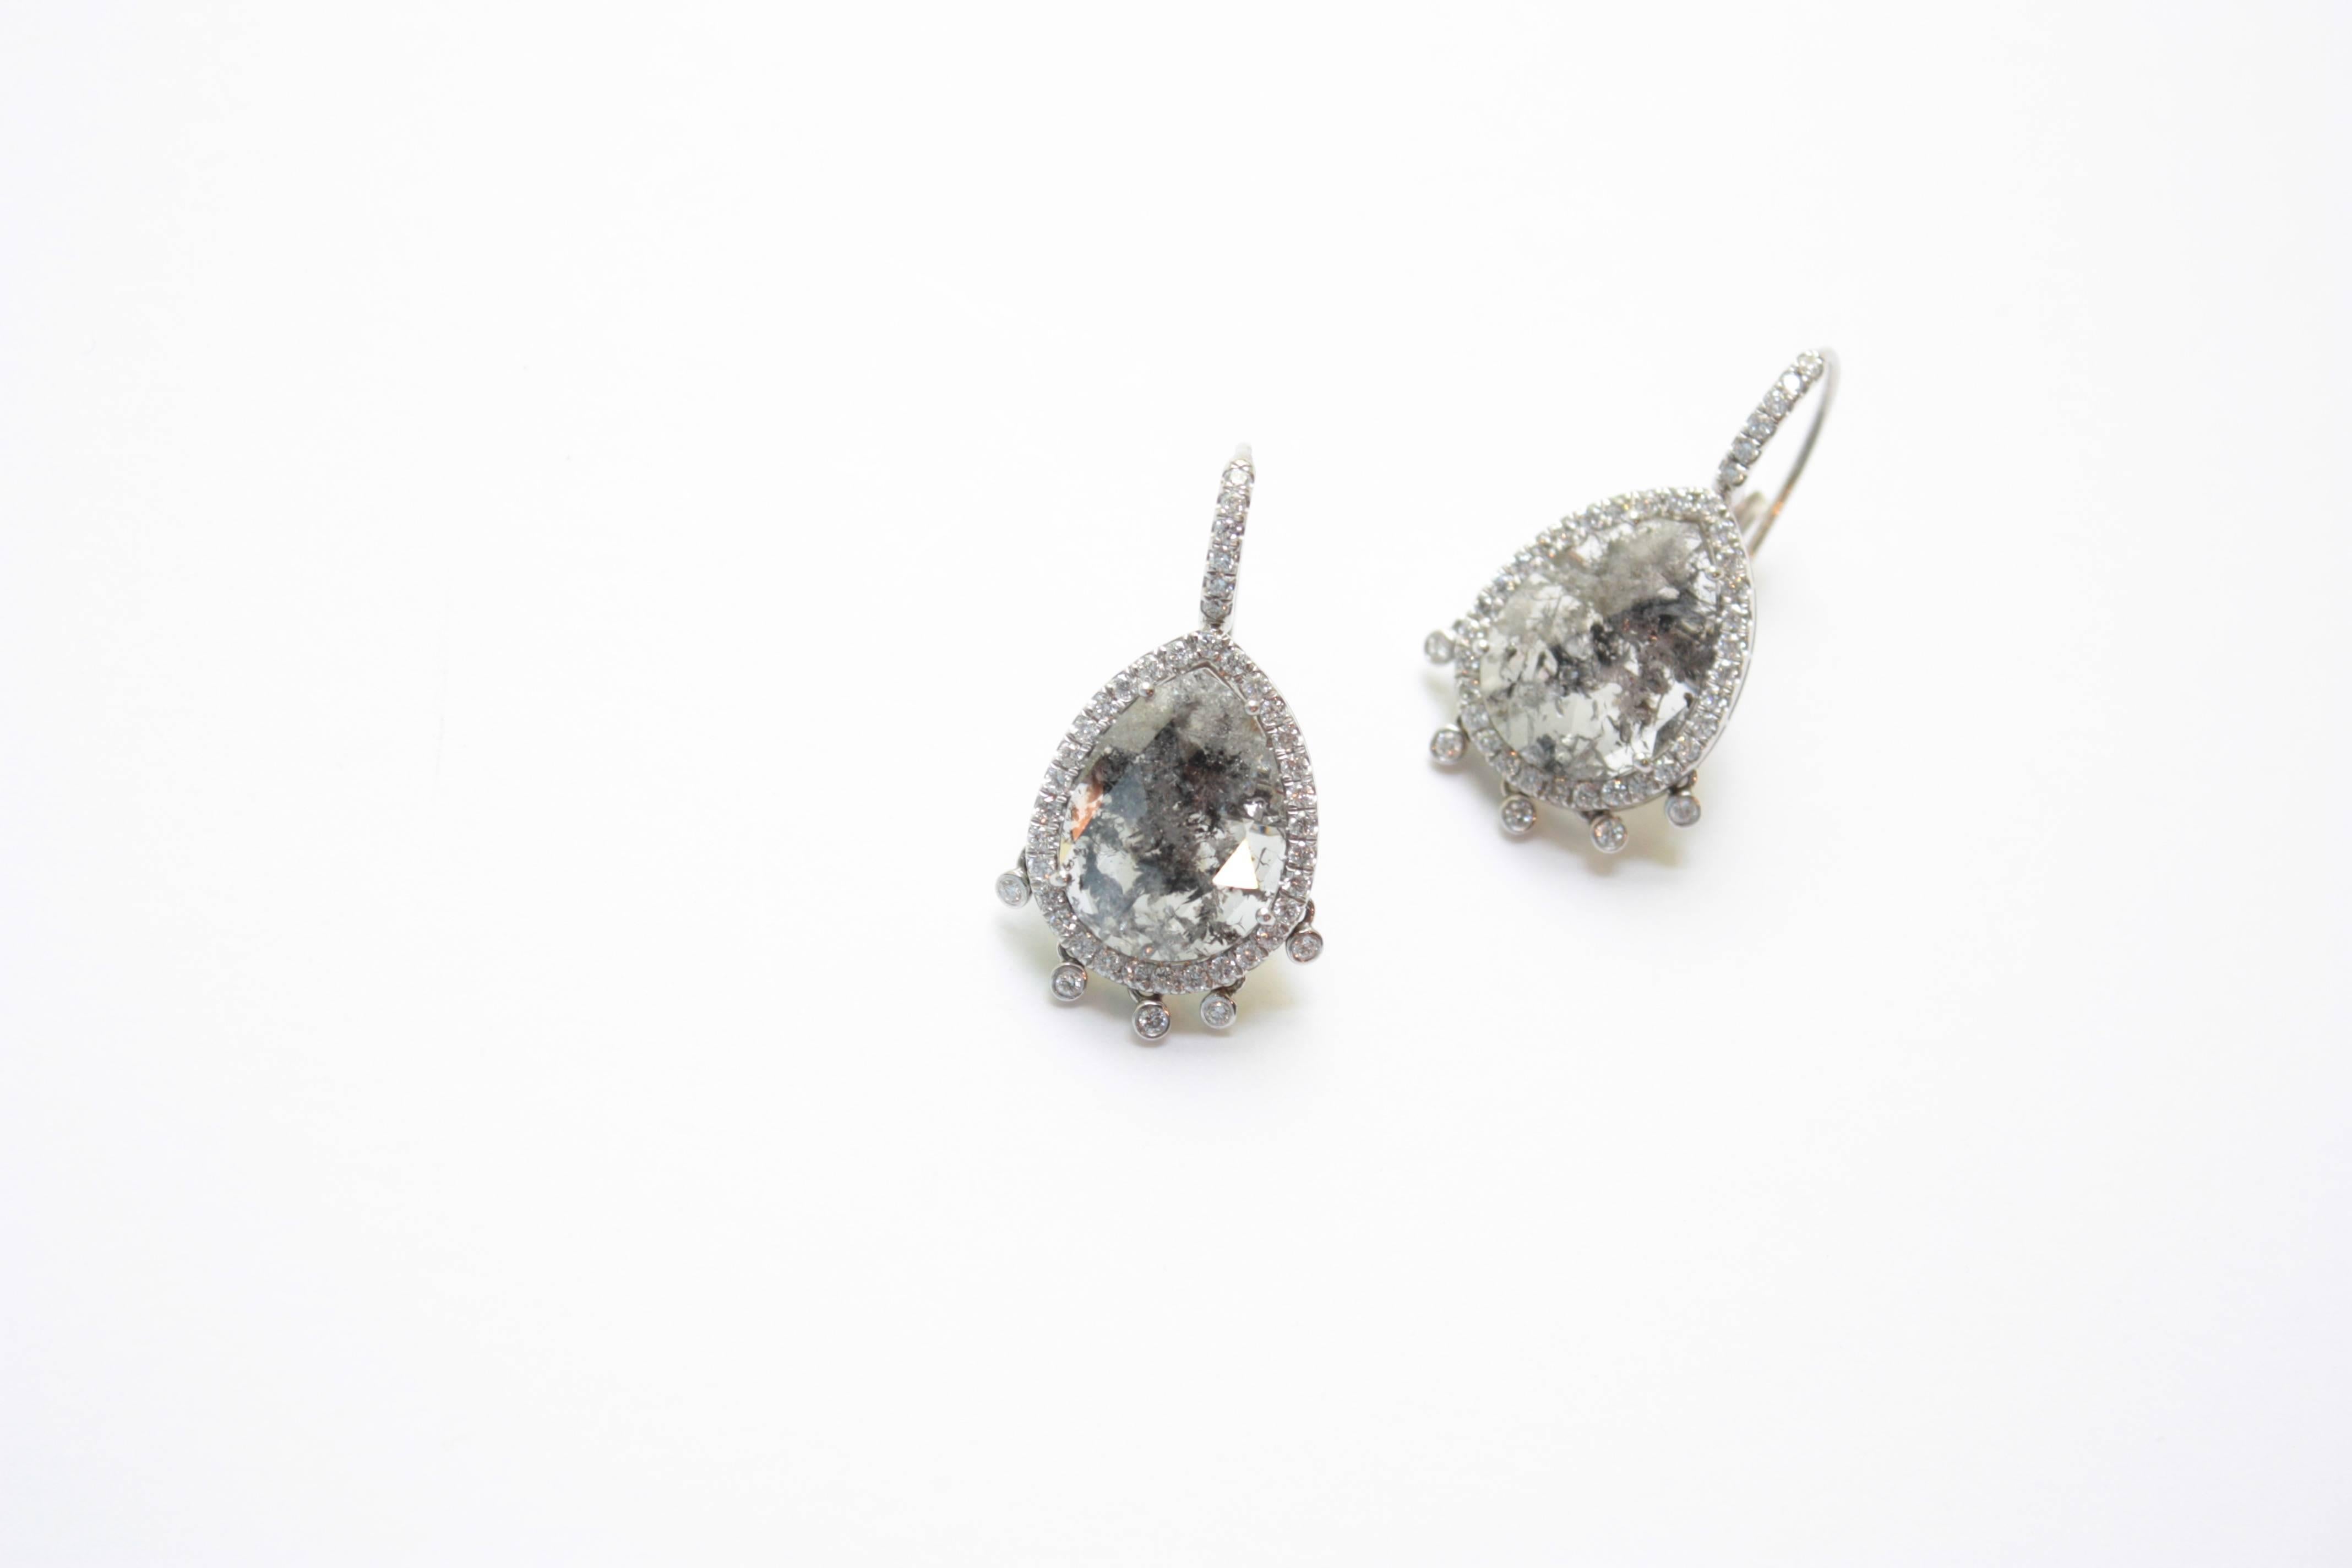 Shimmee® Eardrops
A pair of platinum eardrops, paying tribute to an unusual pair of pear-shaped grey rose-cut diamonds.  Each eardrop begins with a diamond-encrusted earwire, holding the large pear-shaped diamond in its white diamond frame.  For